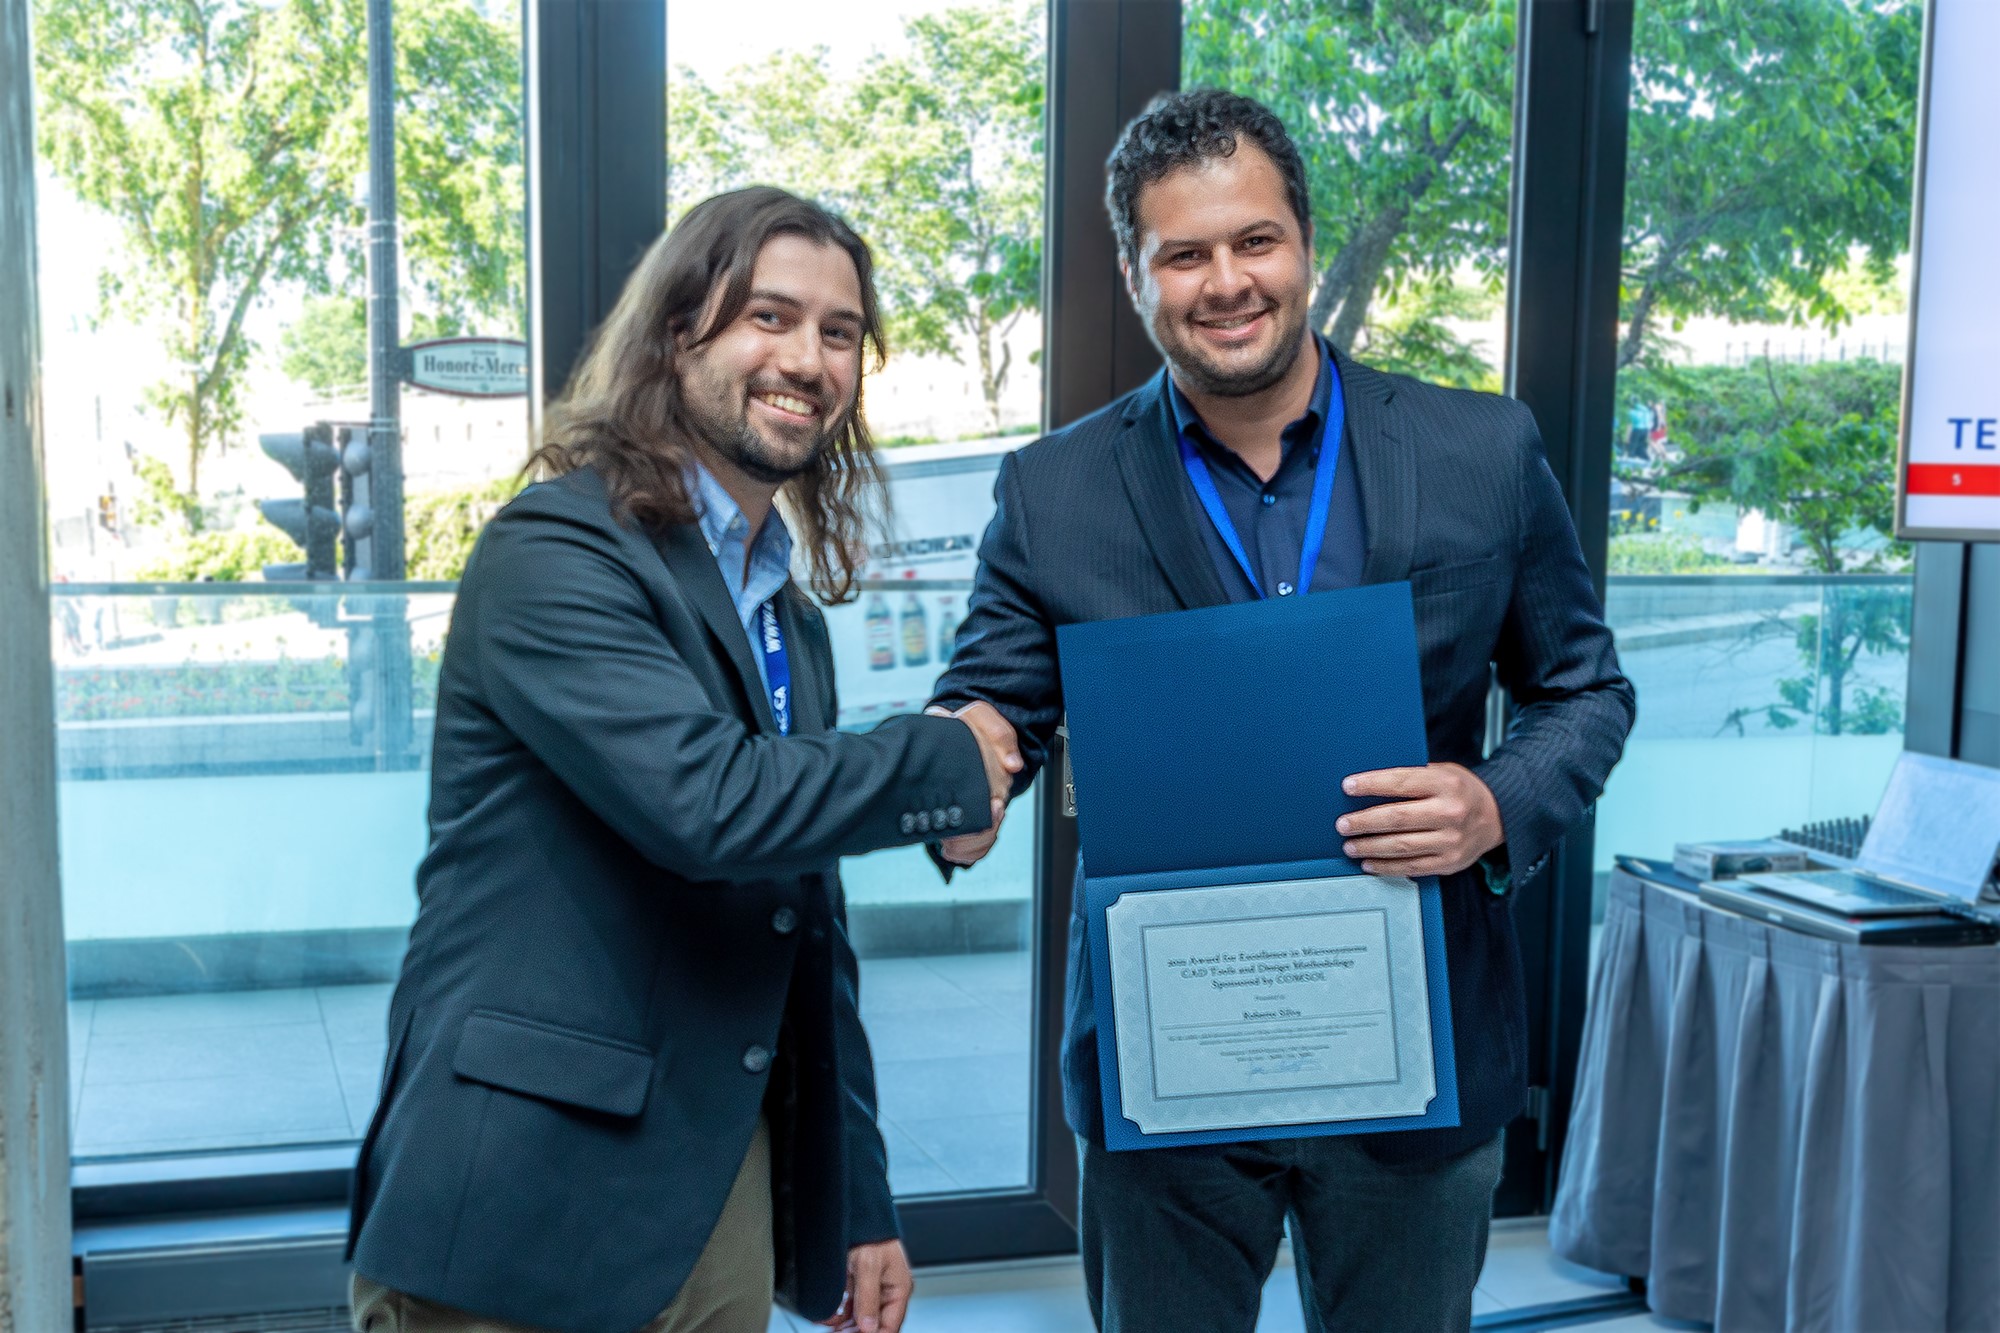 Award For Excellence in CAD Tools and Design Methodology(Roberto Silva, University of Toronto)